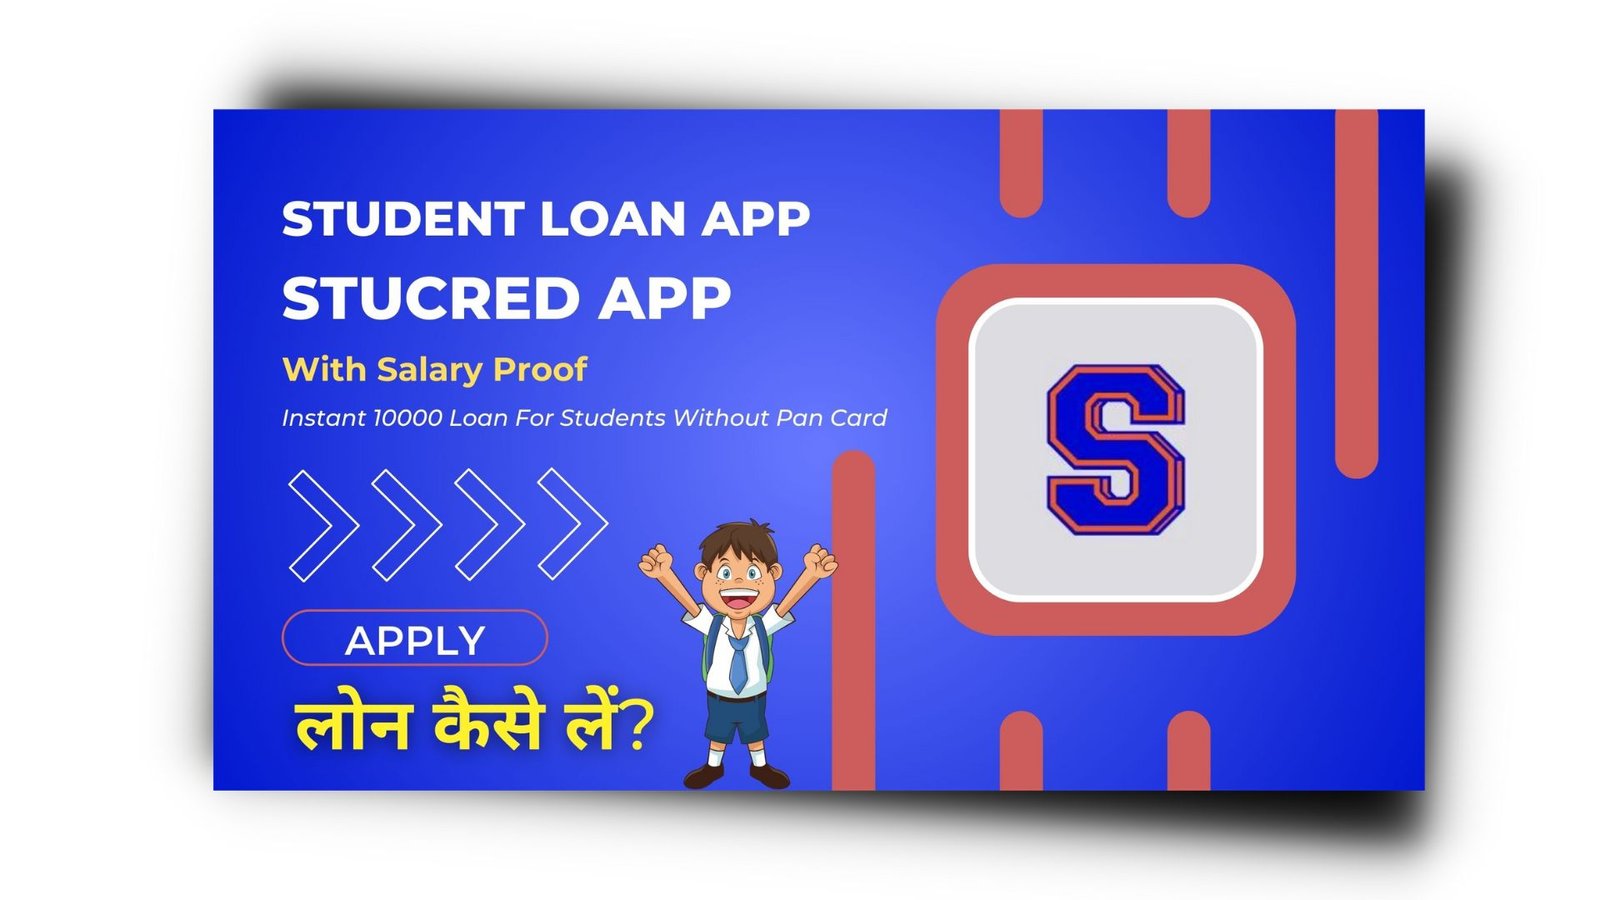 Instant 10000 Loan For Students Without Pan Card in India | Stucred Loan App से लोन कैसे लें?